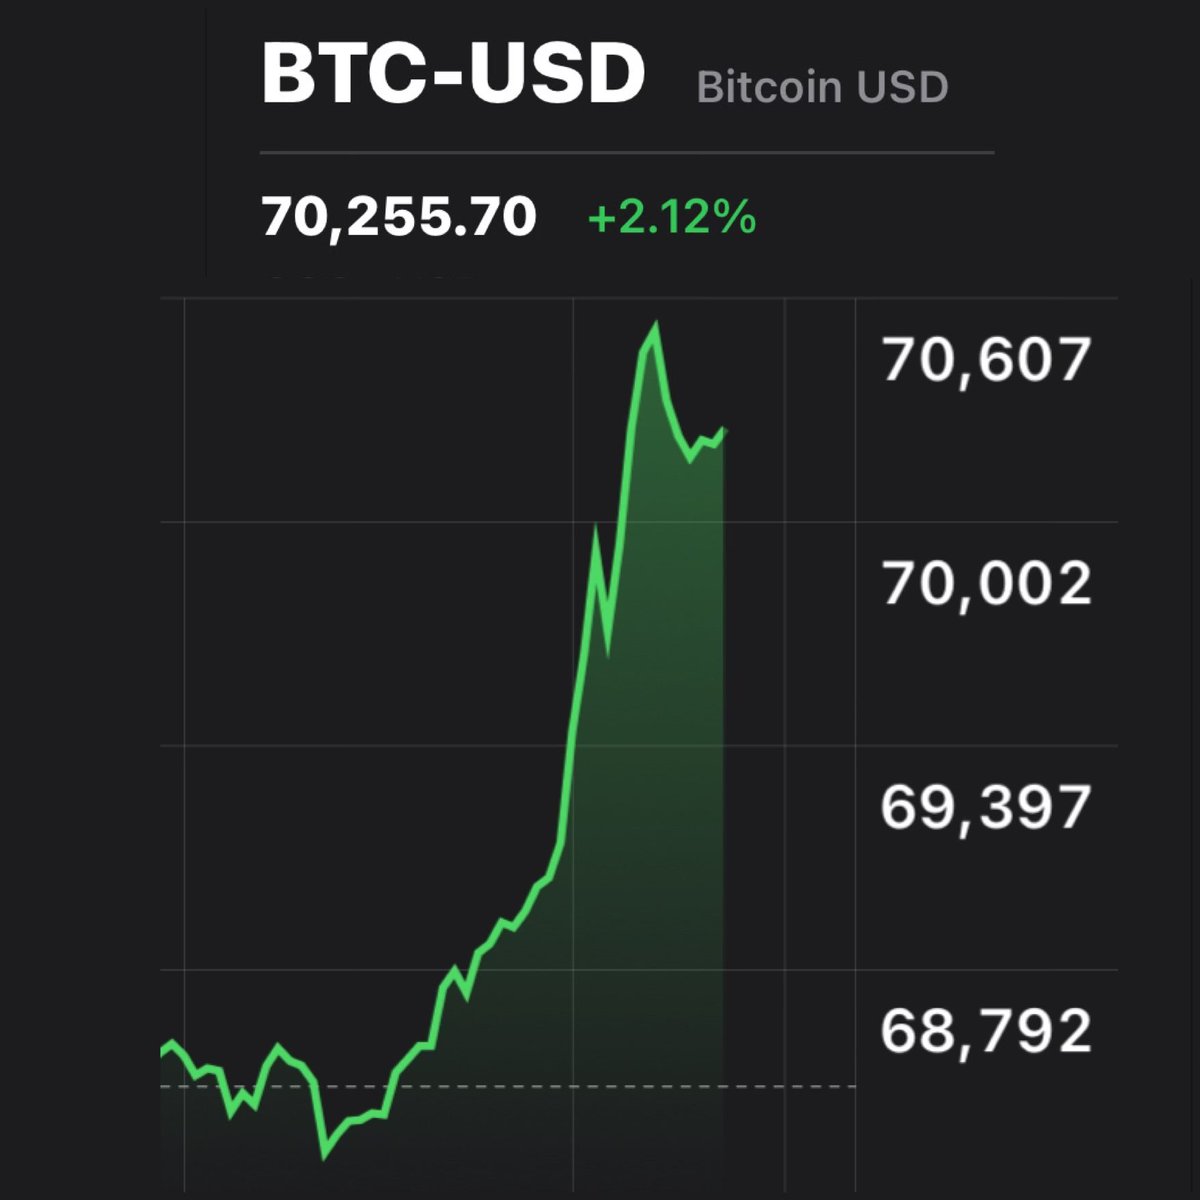 NEW: #Bitcoin breaks $70,000 and has a market cap of $1.38 Trillion